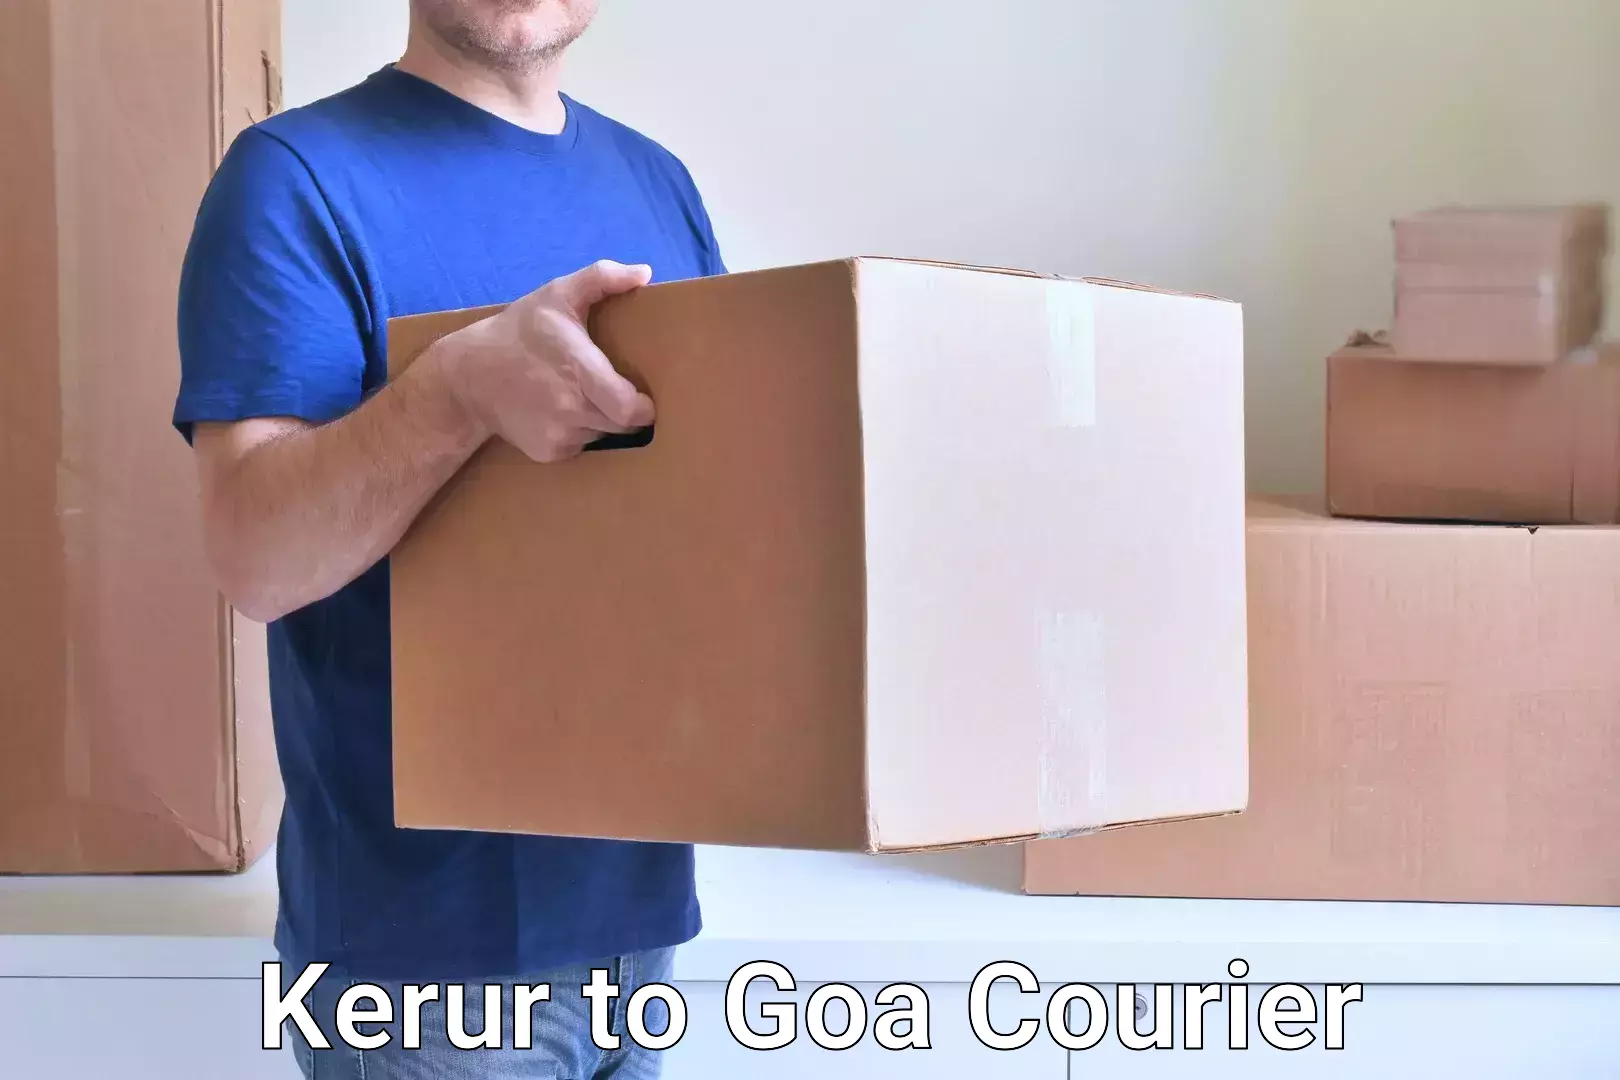 Seamless shipping experience in Kerur to Goa